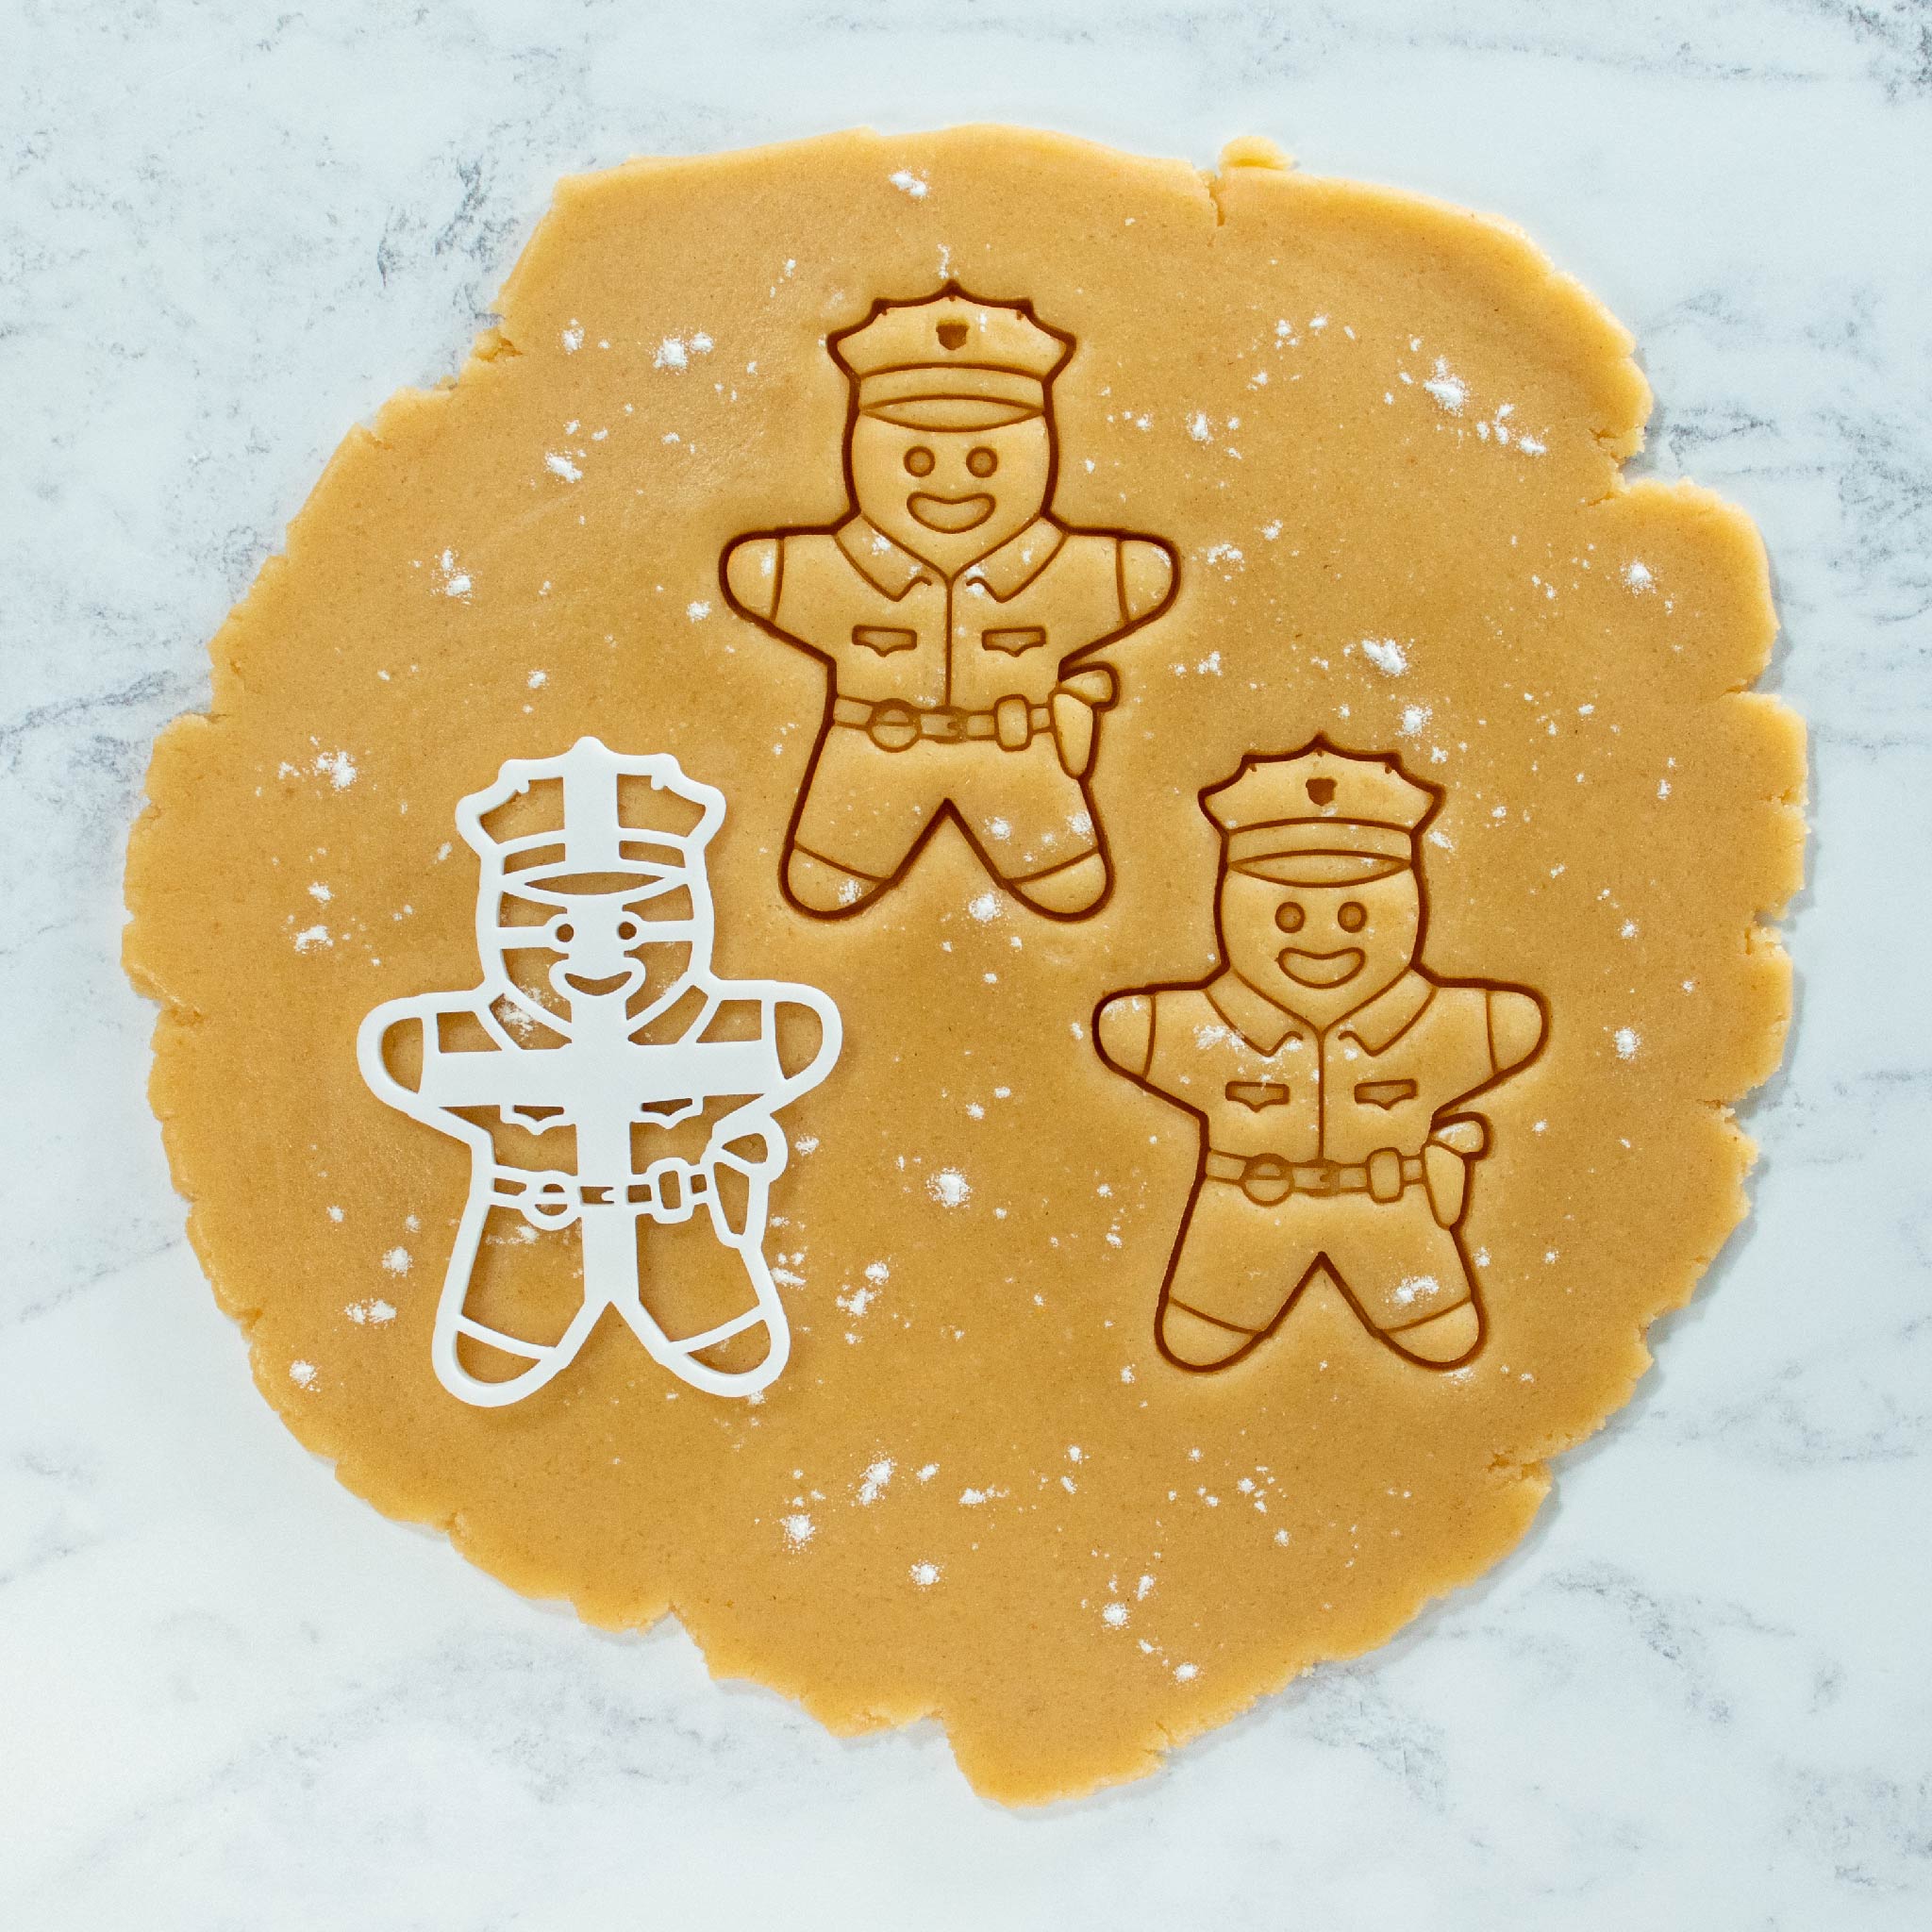 Police officer cookies cutout dough made with bakerlogy police officer cookie cutter